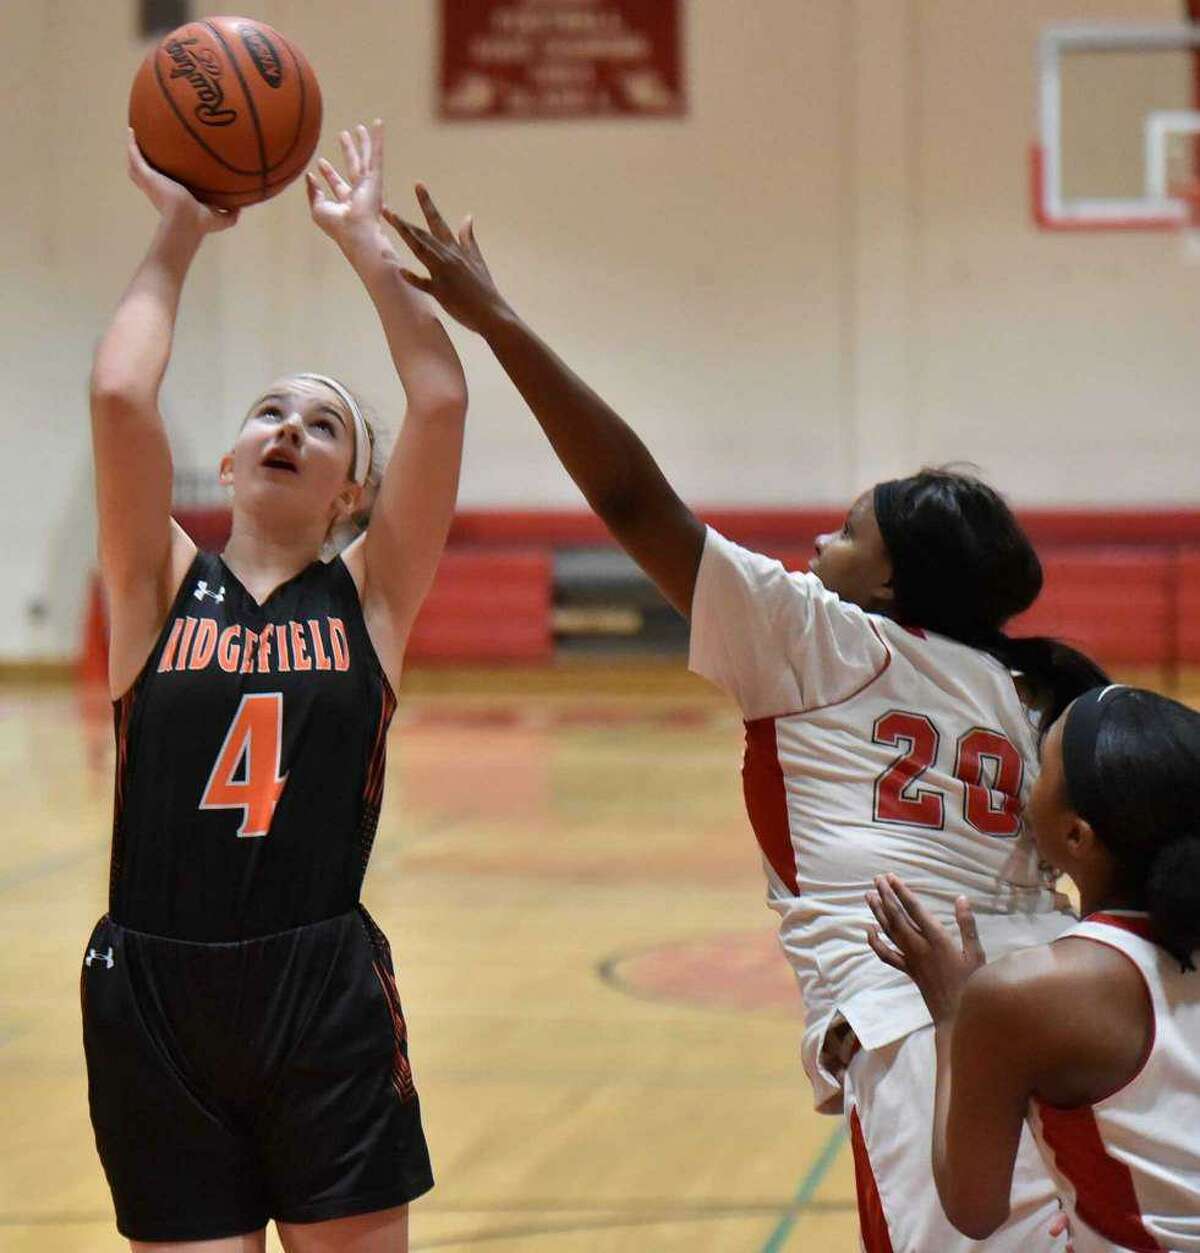 Katie Flynn (shown in a game last season) scored 19 points to help Ridgefield beat Lauralton Hall on Wednesday night in Milford.